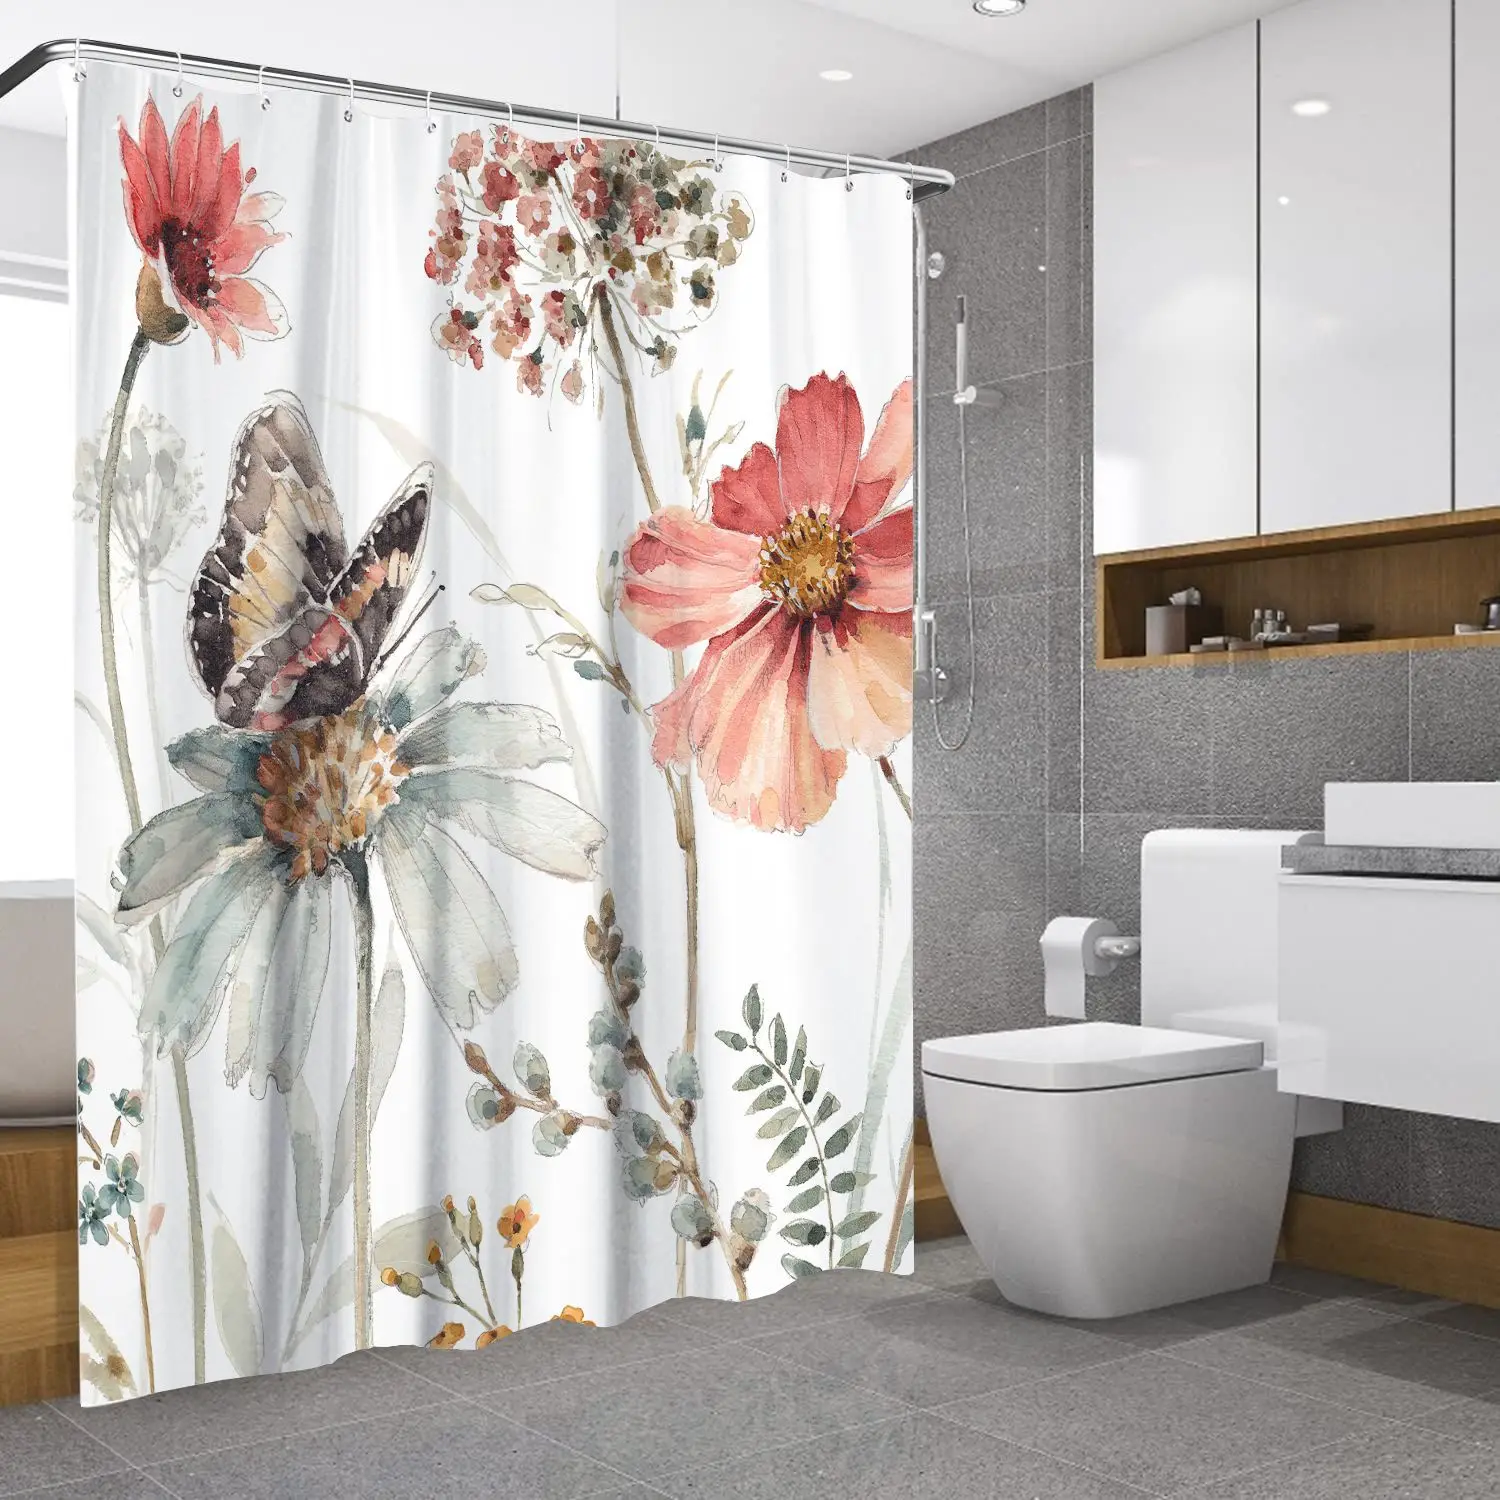 https://ae01.alicdn.com/kf/S0ca190f098204a73b95466e3de2e28b3K/Floral-Printed-Shower-Curtain-Bathroom-Accessories-Waterproof-Curtains-Home-Decor-Aesthetic-Valentine-s-Day-Decoration.jpg